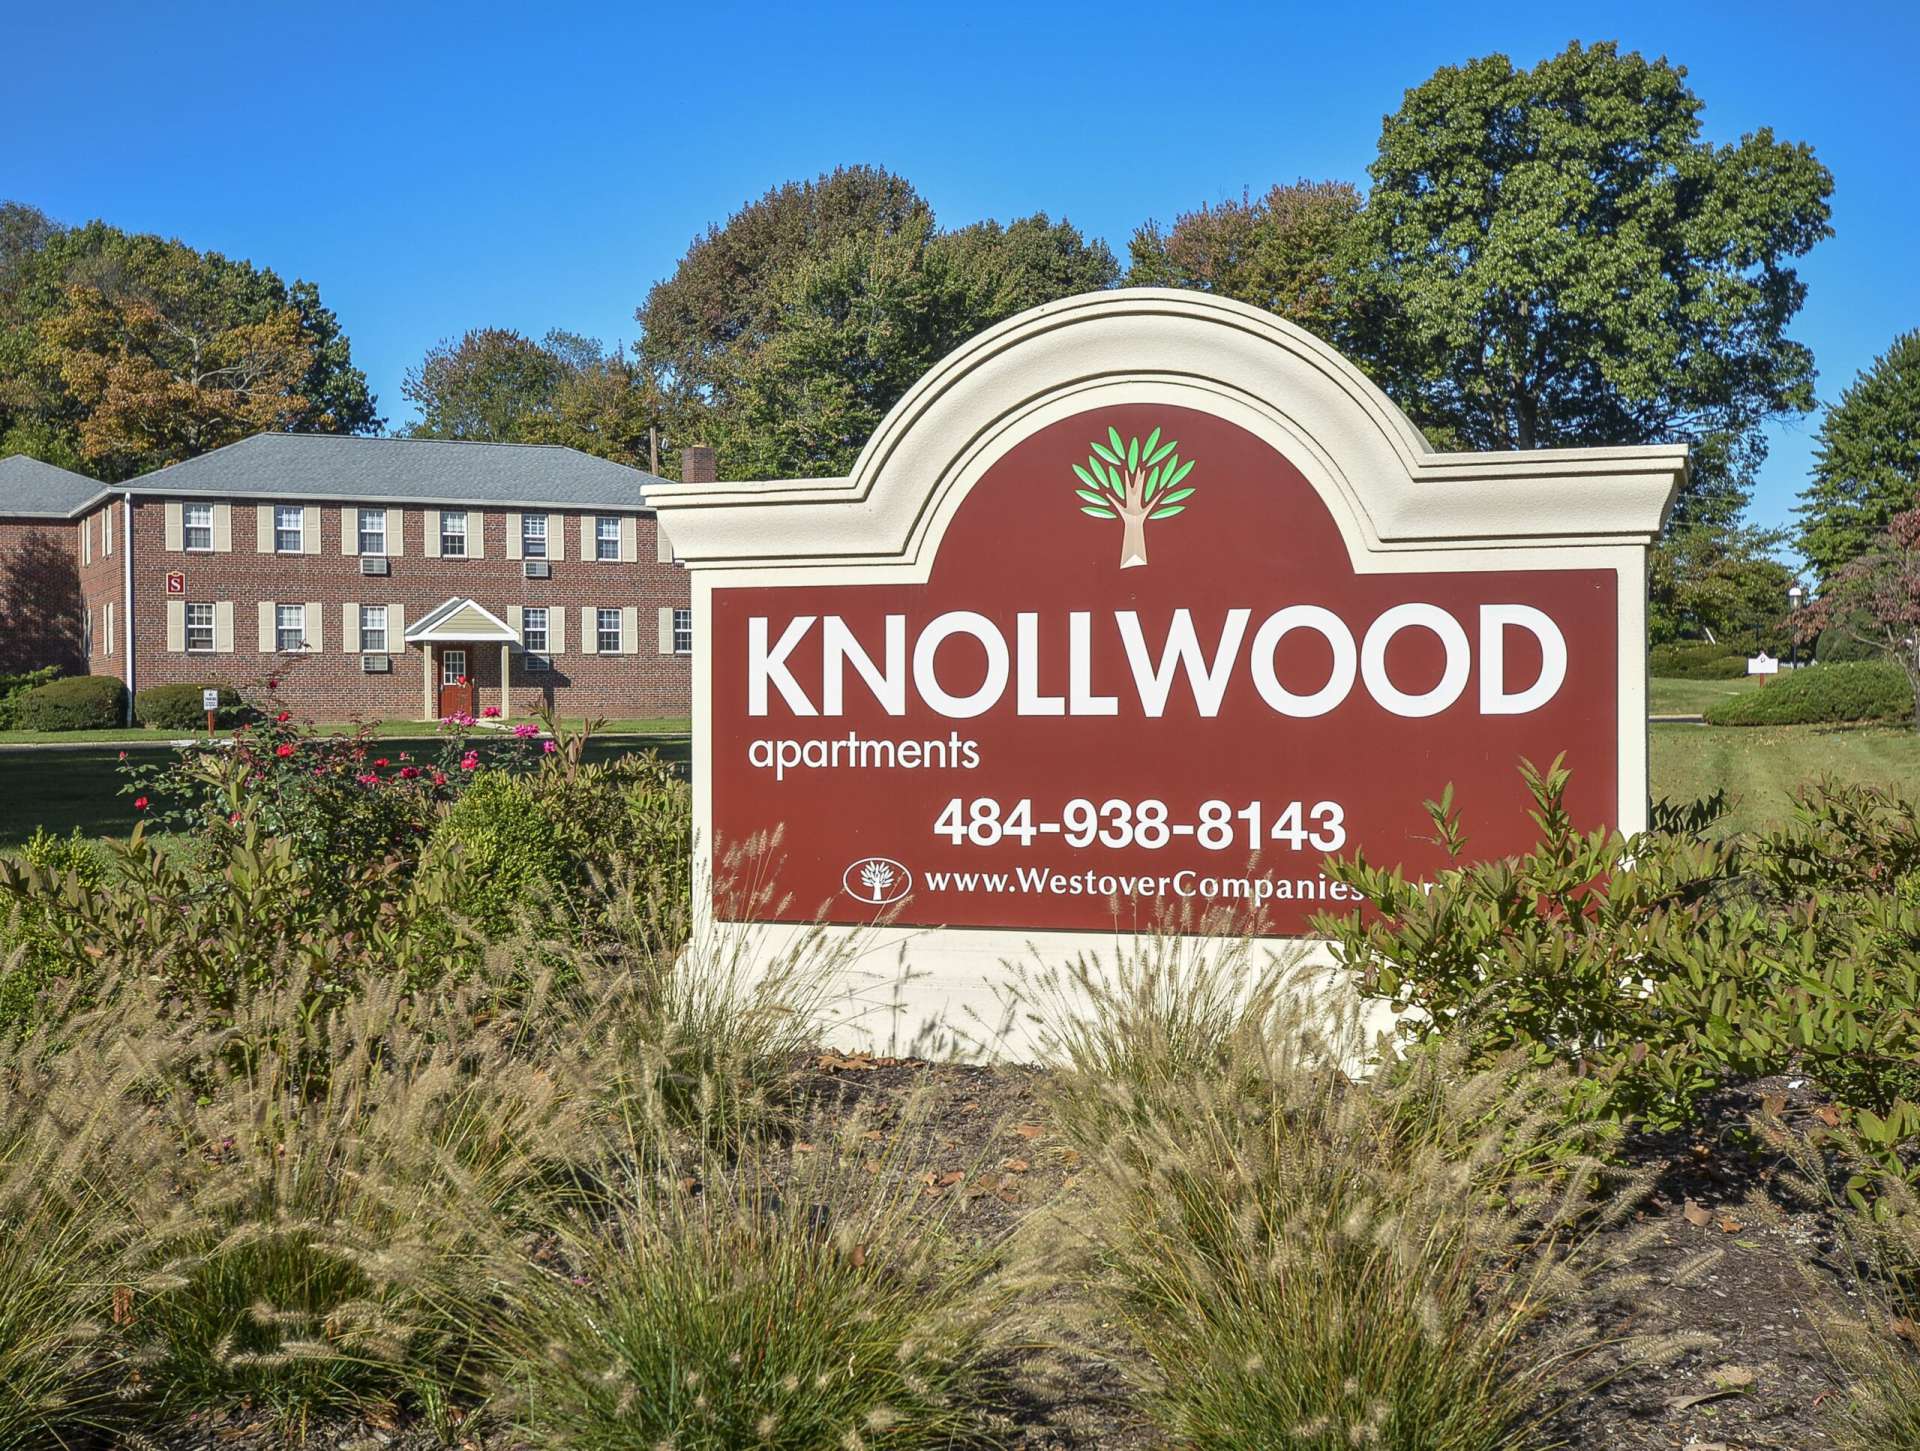 Knollwood Apartments sign surrounded by plants.